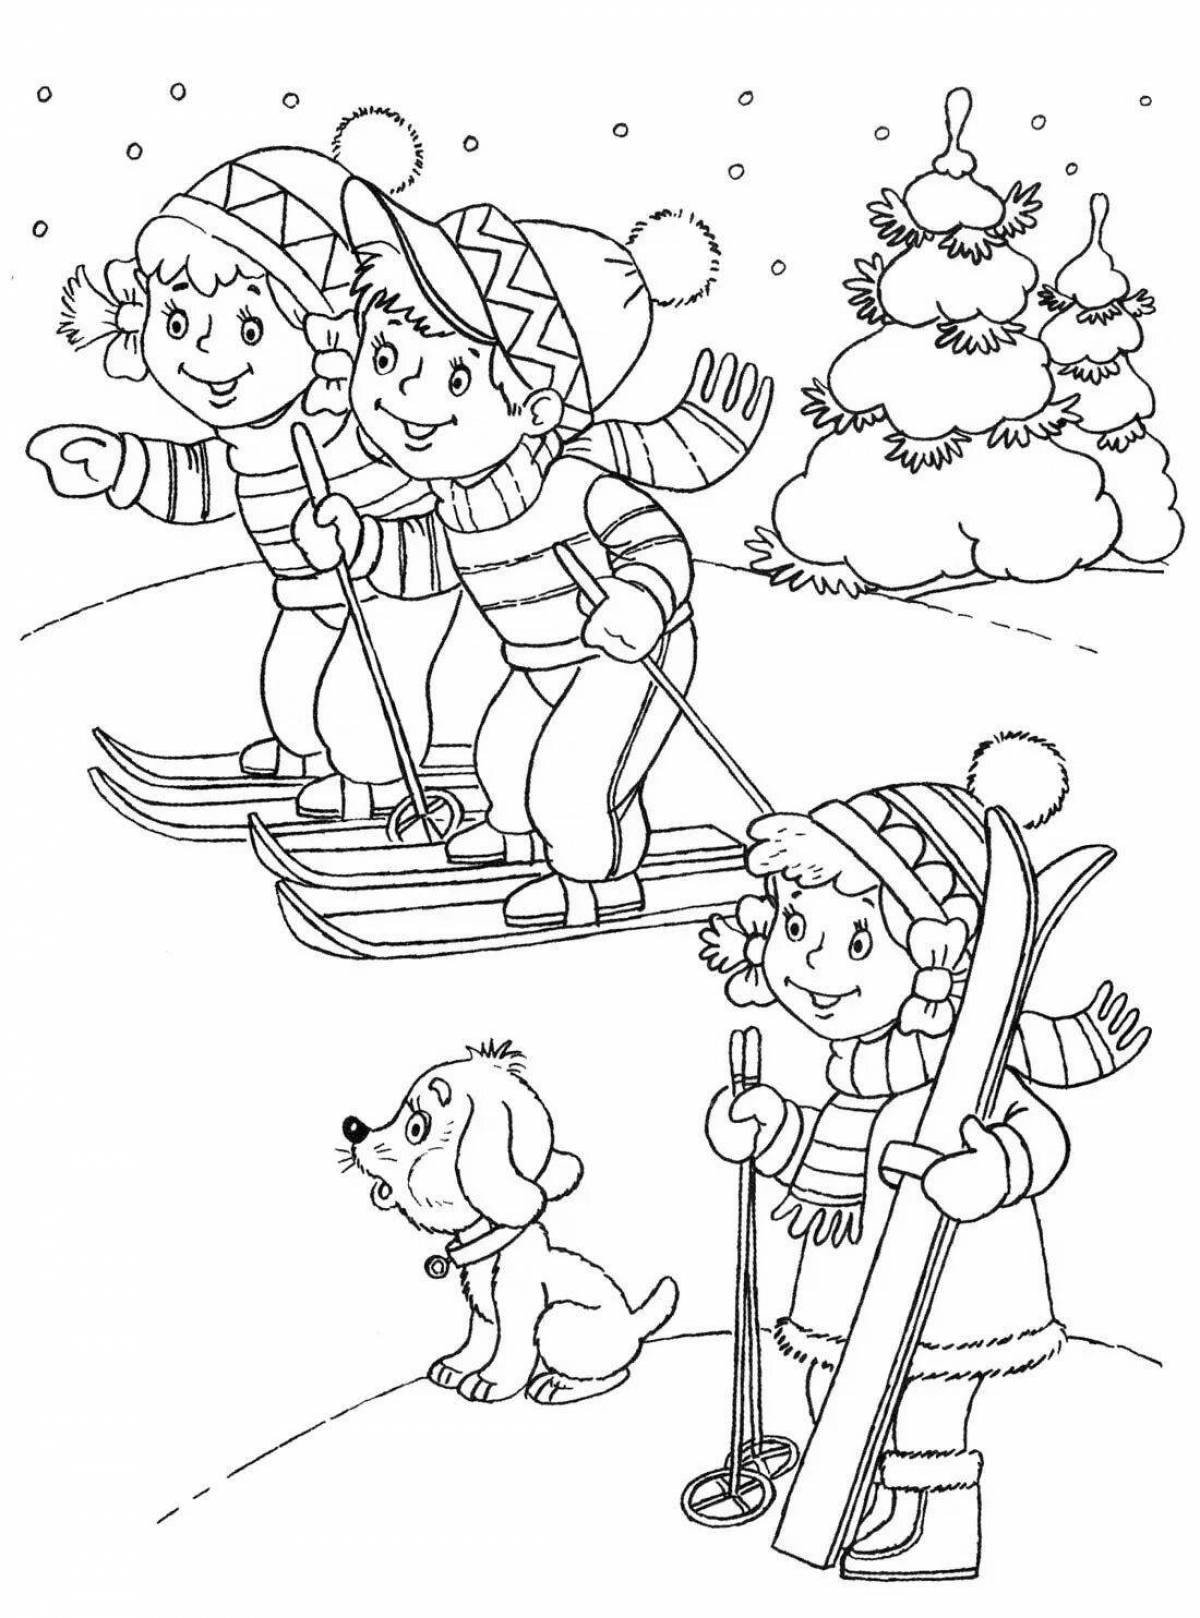 Coloring page amazing tanya is not afraid of frost